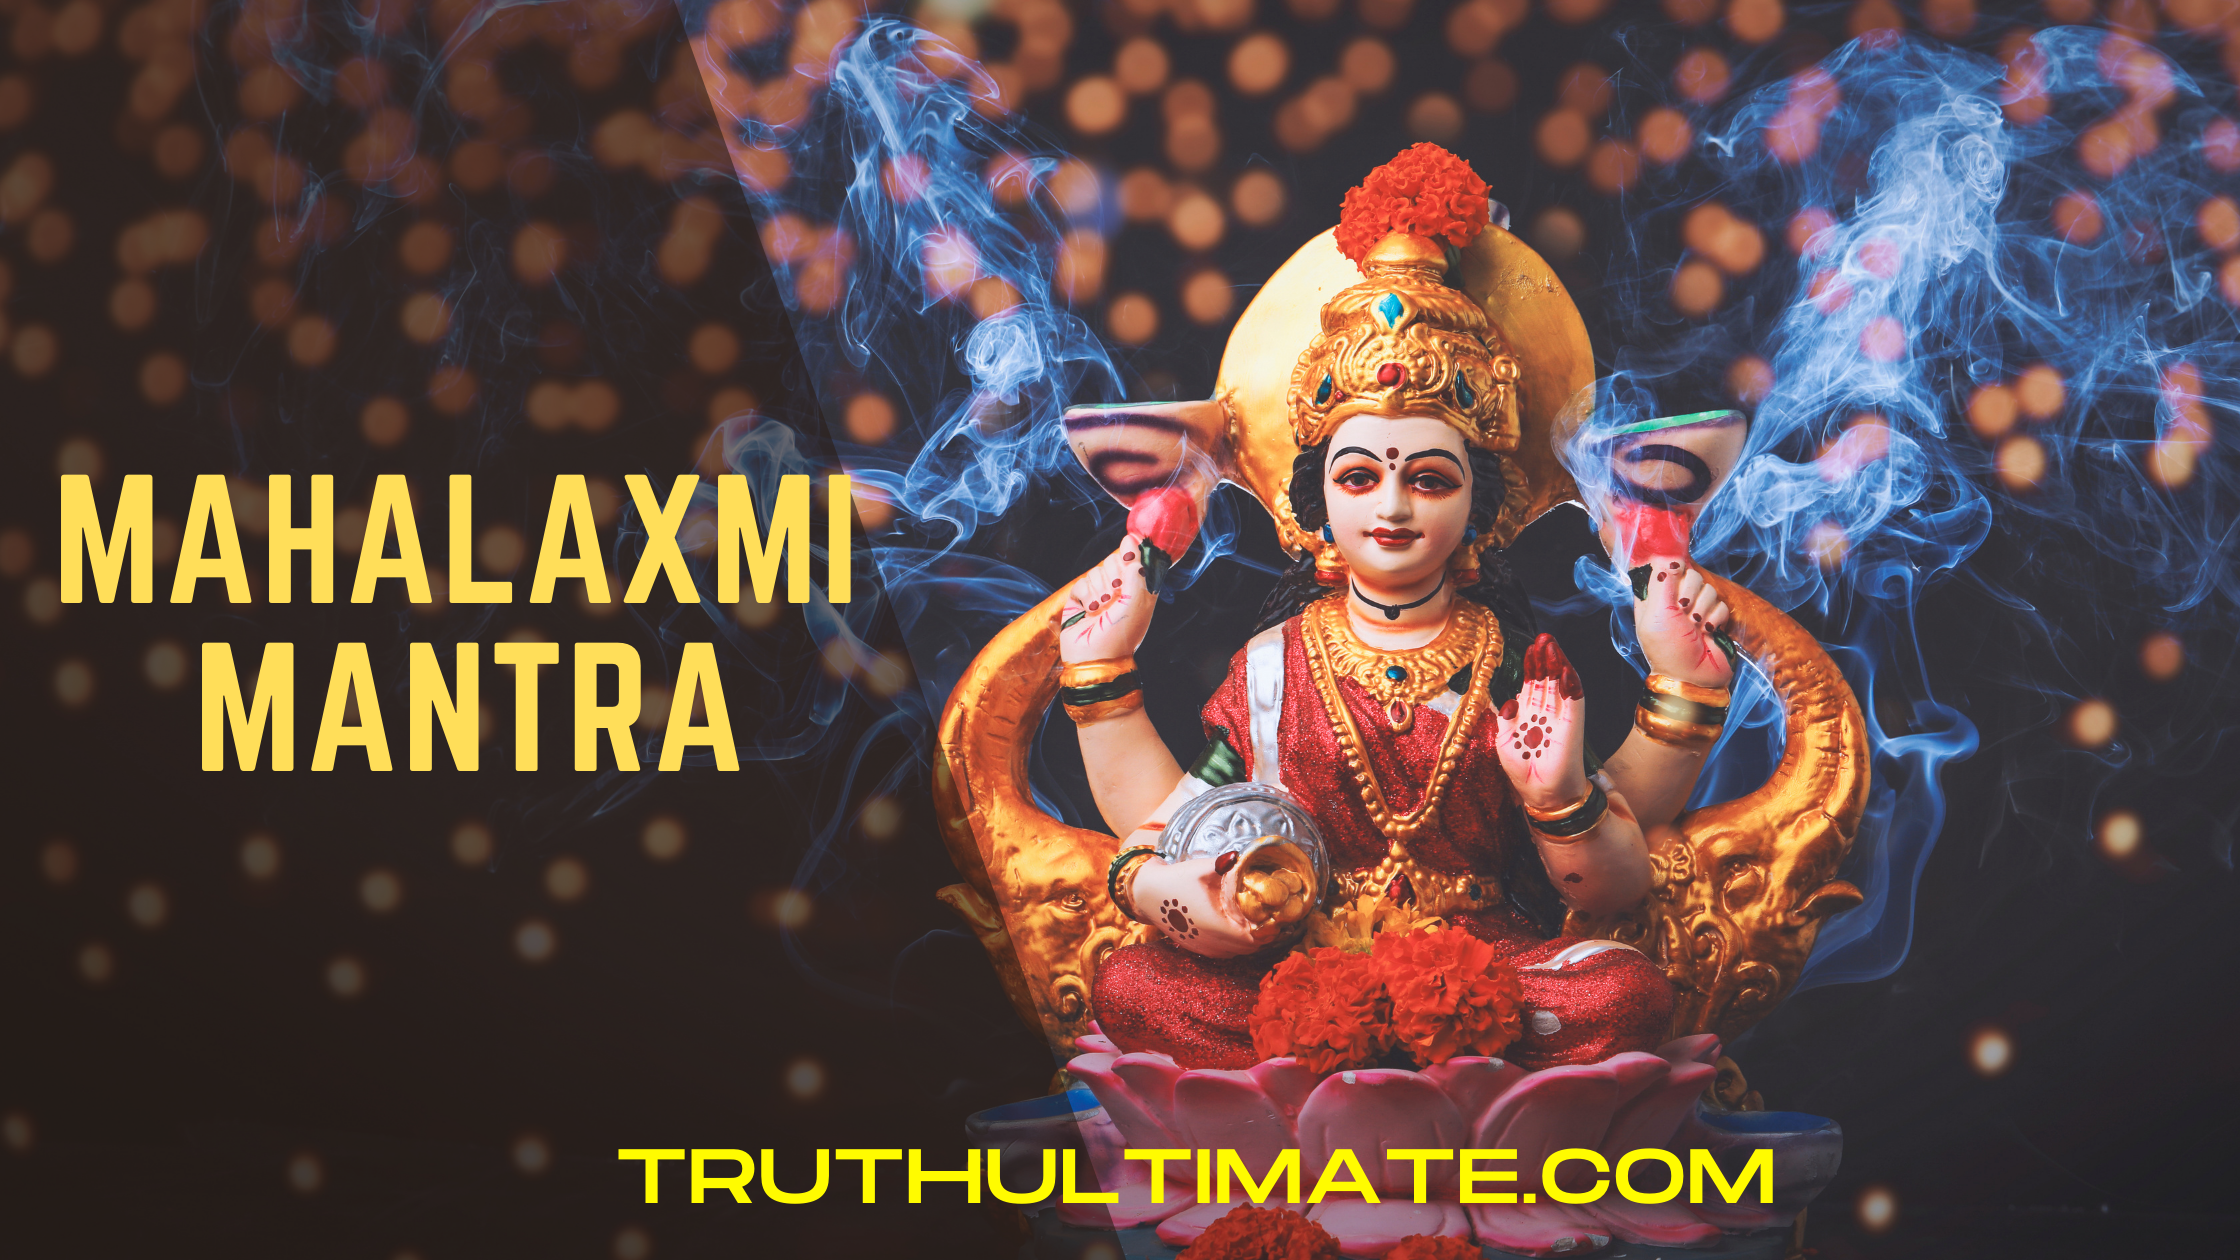 You are currently viewing Mahalaxmi Mantra